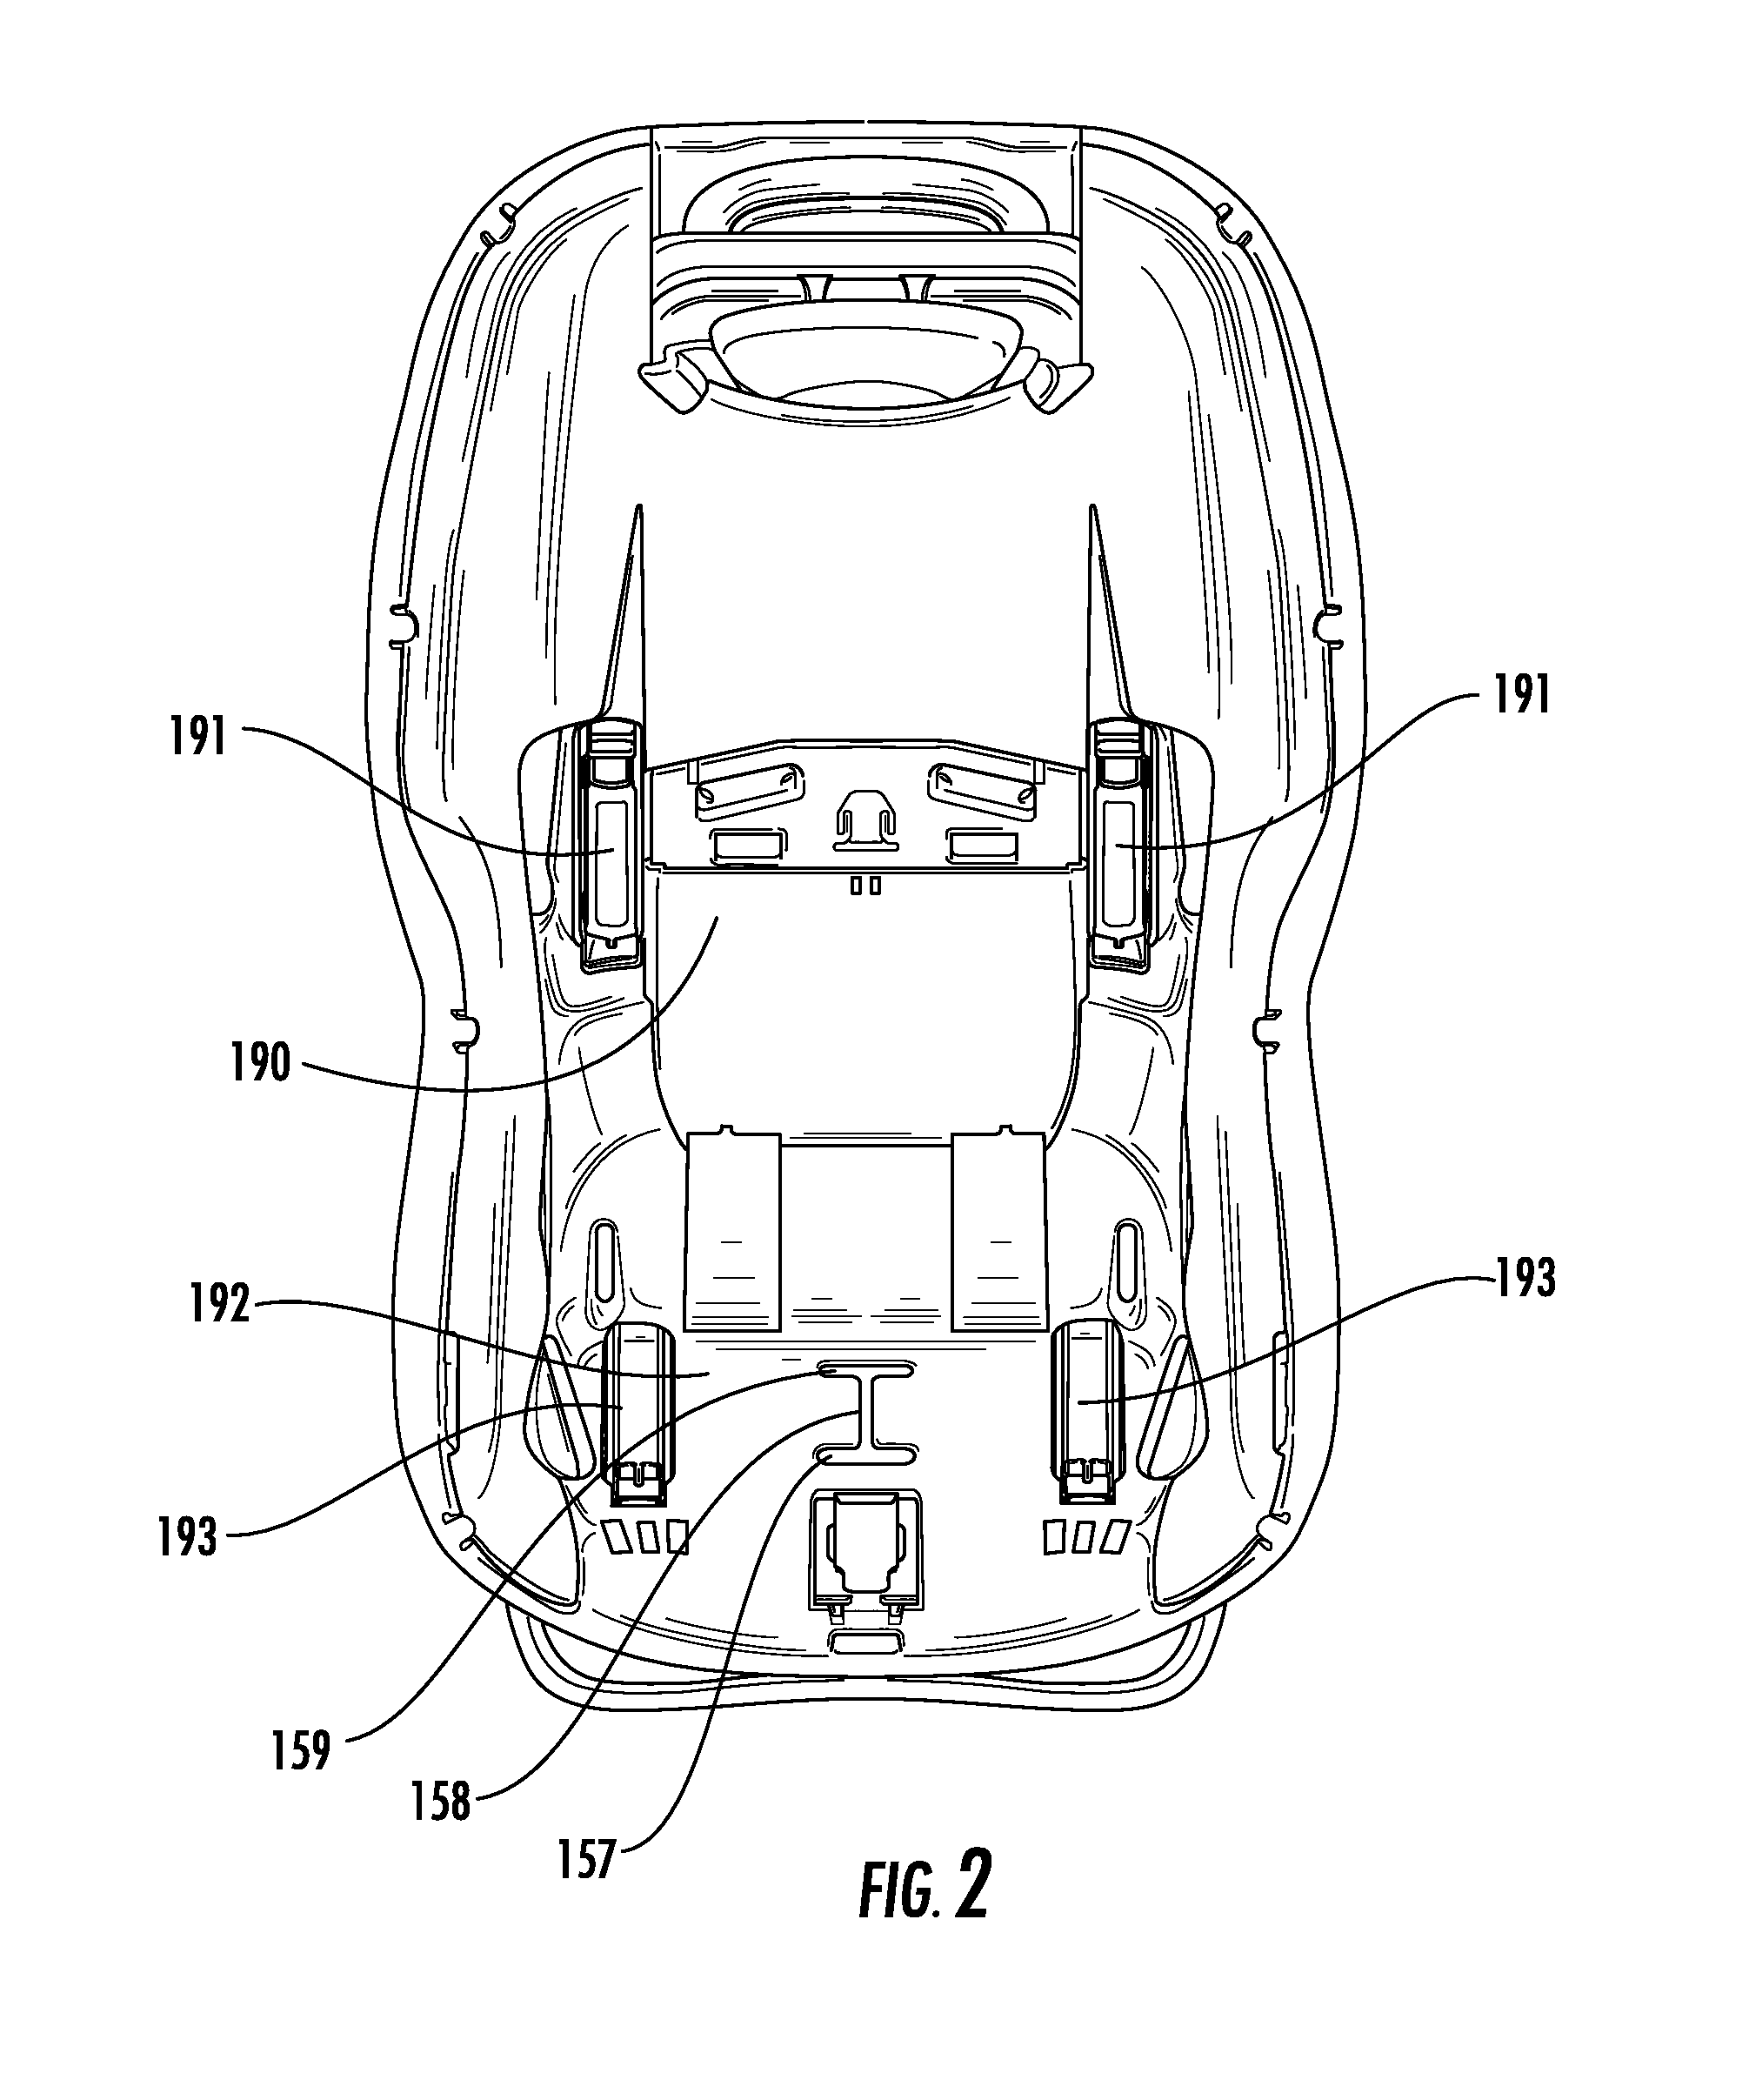 Child safety seat with energy absorbing apparatus